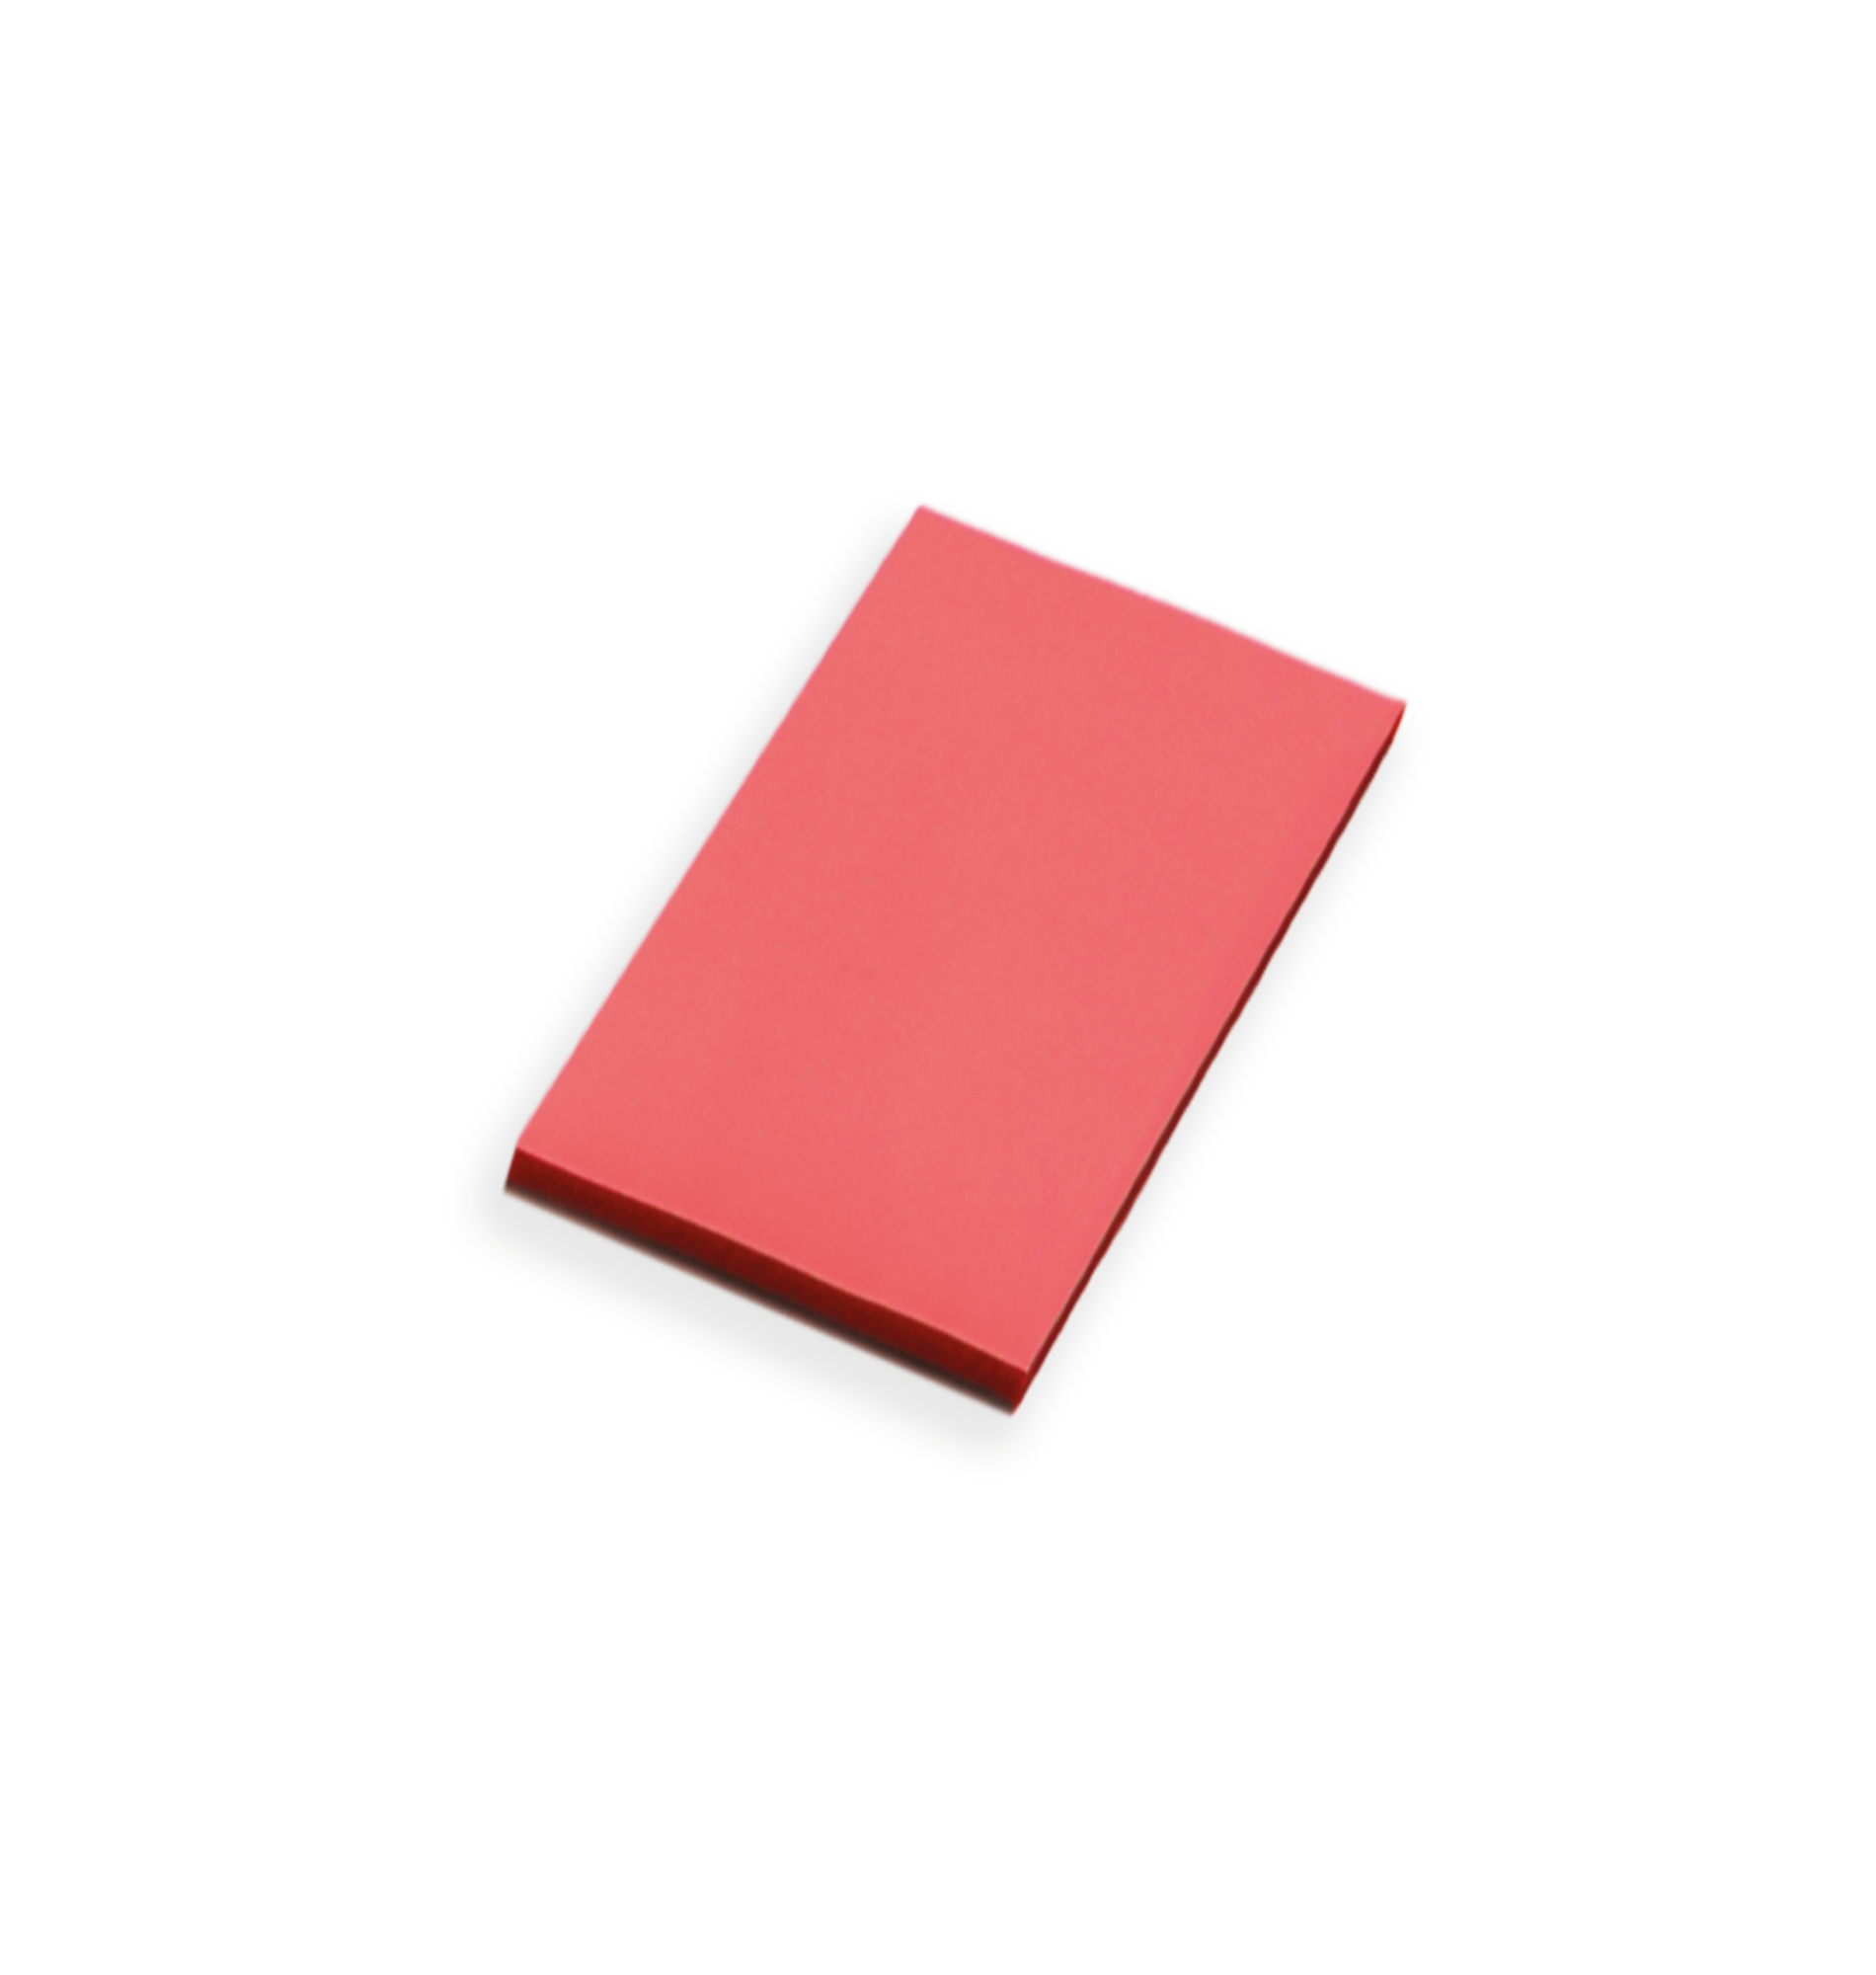 TaktiNotes 8x14cm packaging unit 100 red